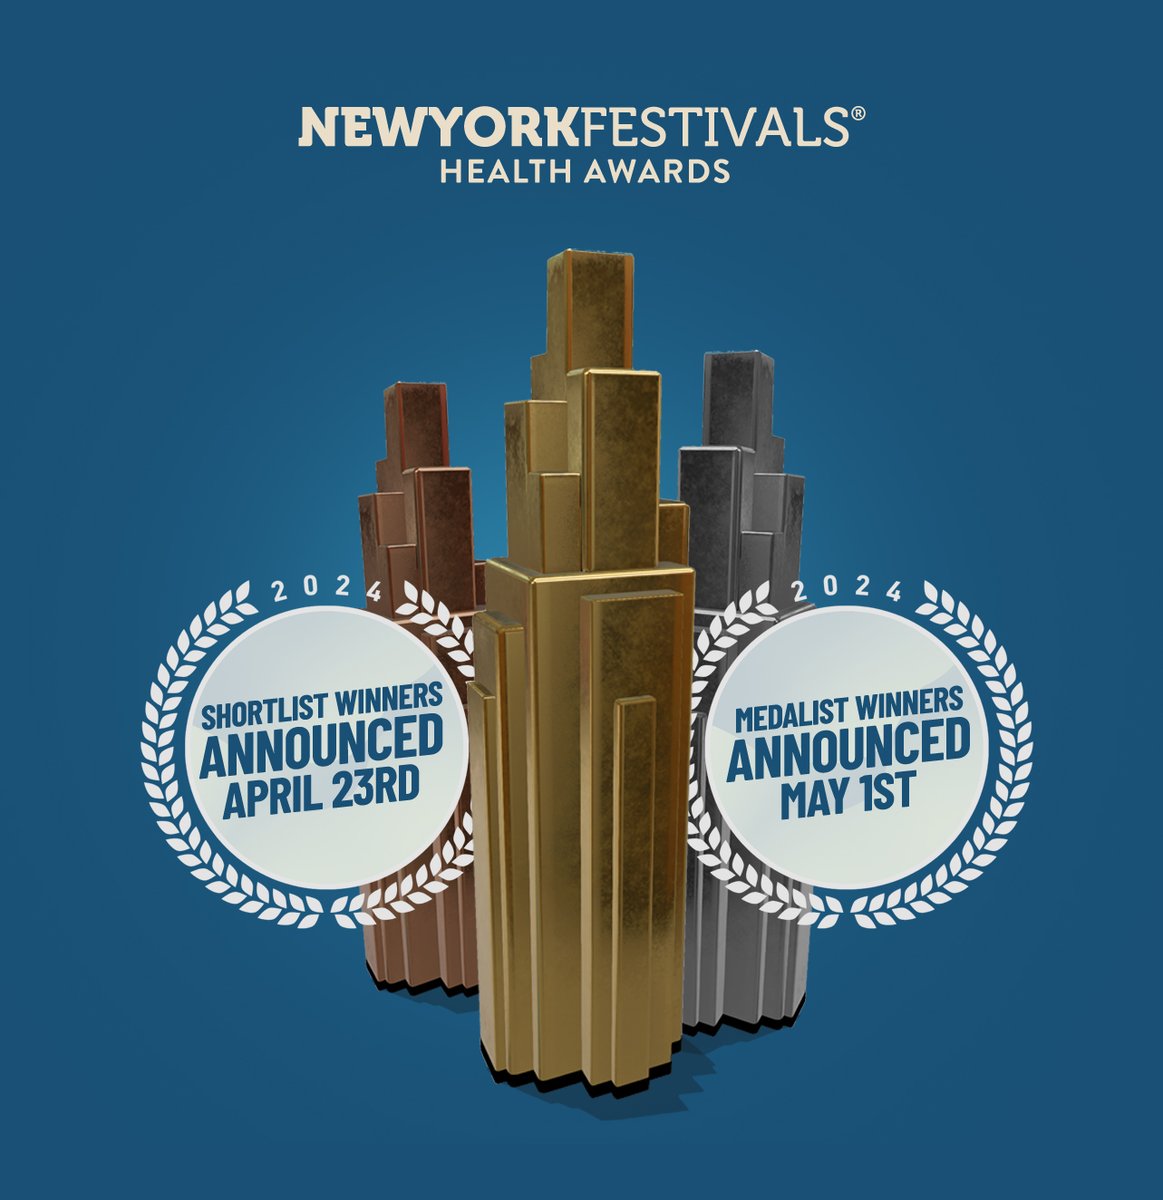 Exciting news from the New York Festivals Health Awards: The shortlist winners will be announced on April 23rd, and we're eagerly awaiting the announcement of the medalist winners on May 1st. It's a time to honor the best in health advertising!